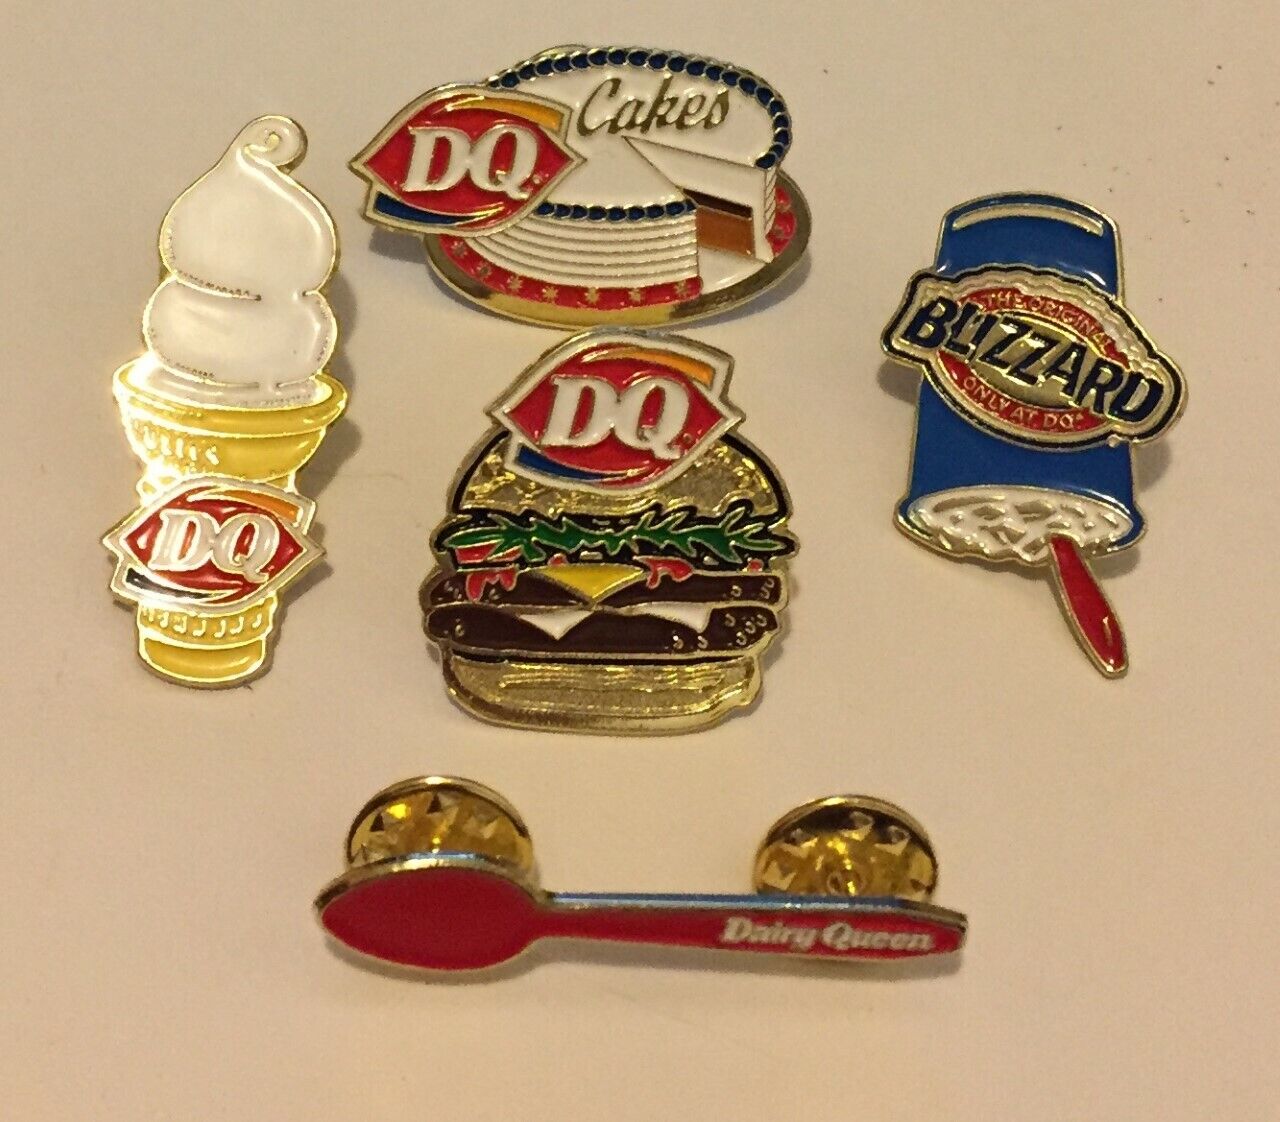 New dairy queen pins still new in bag lot of 5 different ones 